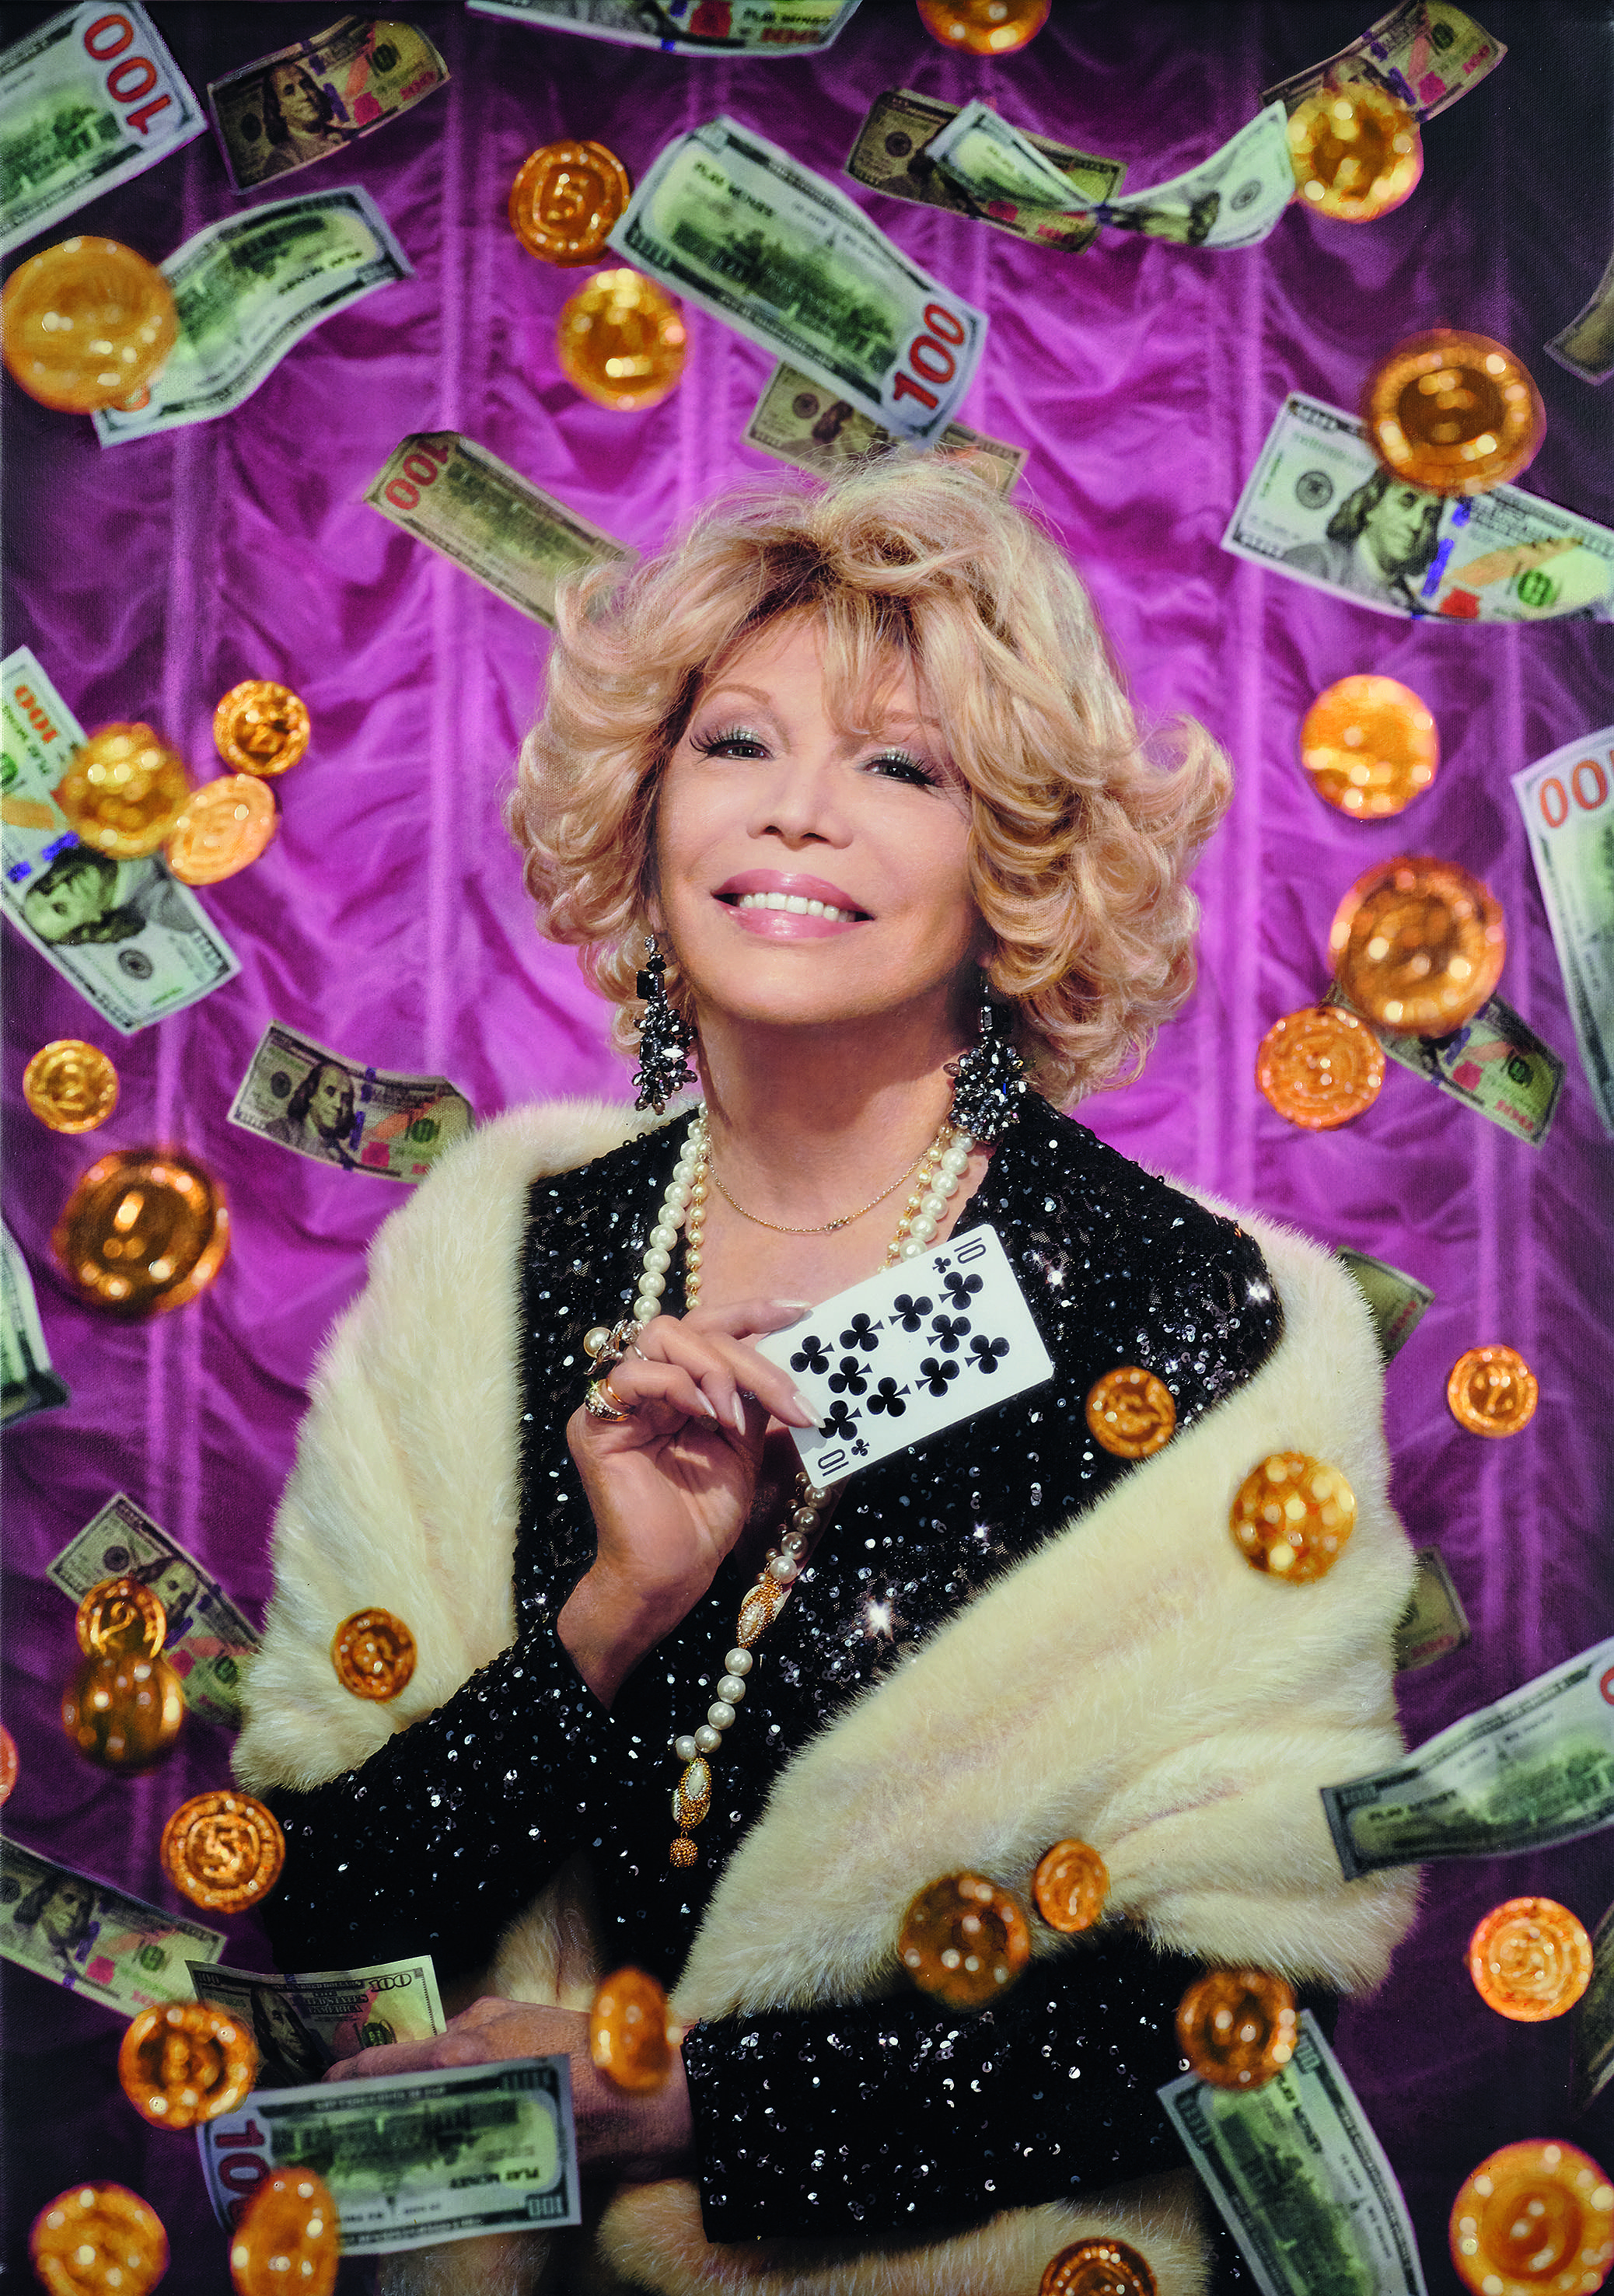 Old Woman's Money at the Free Theater: Amanda Lear as Queen of Spades